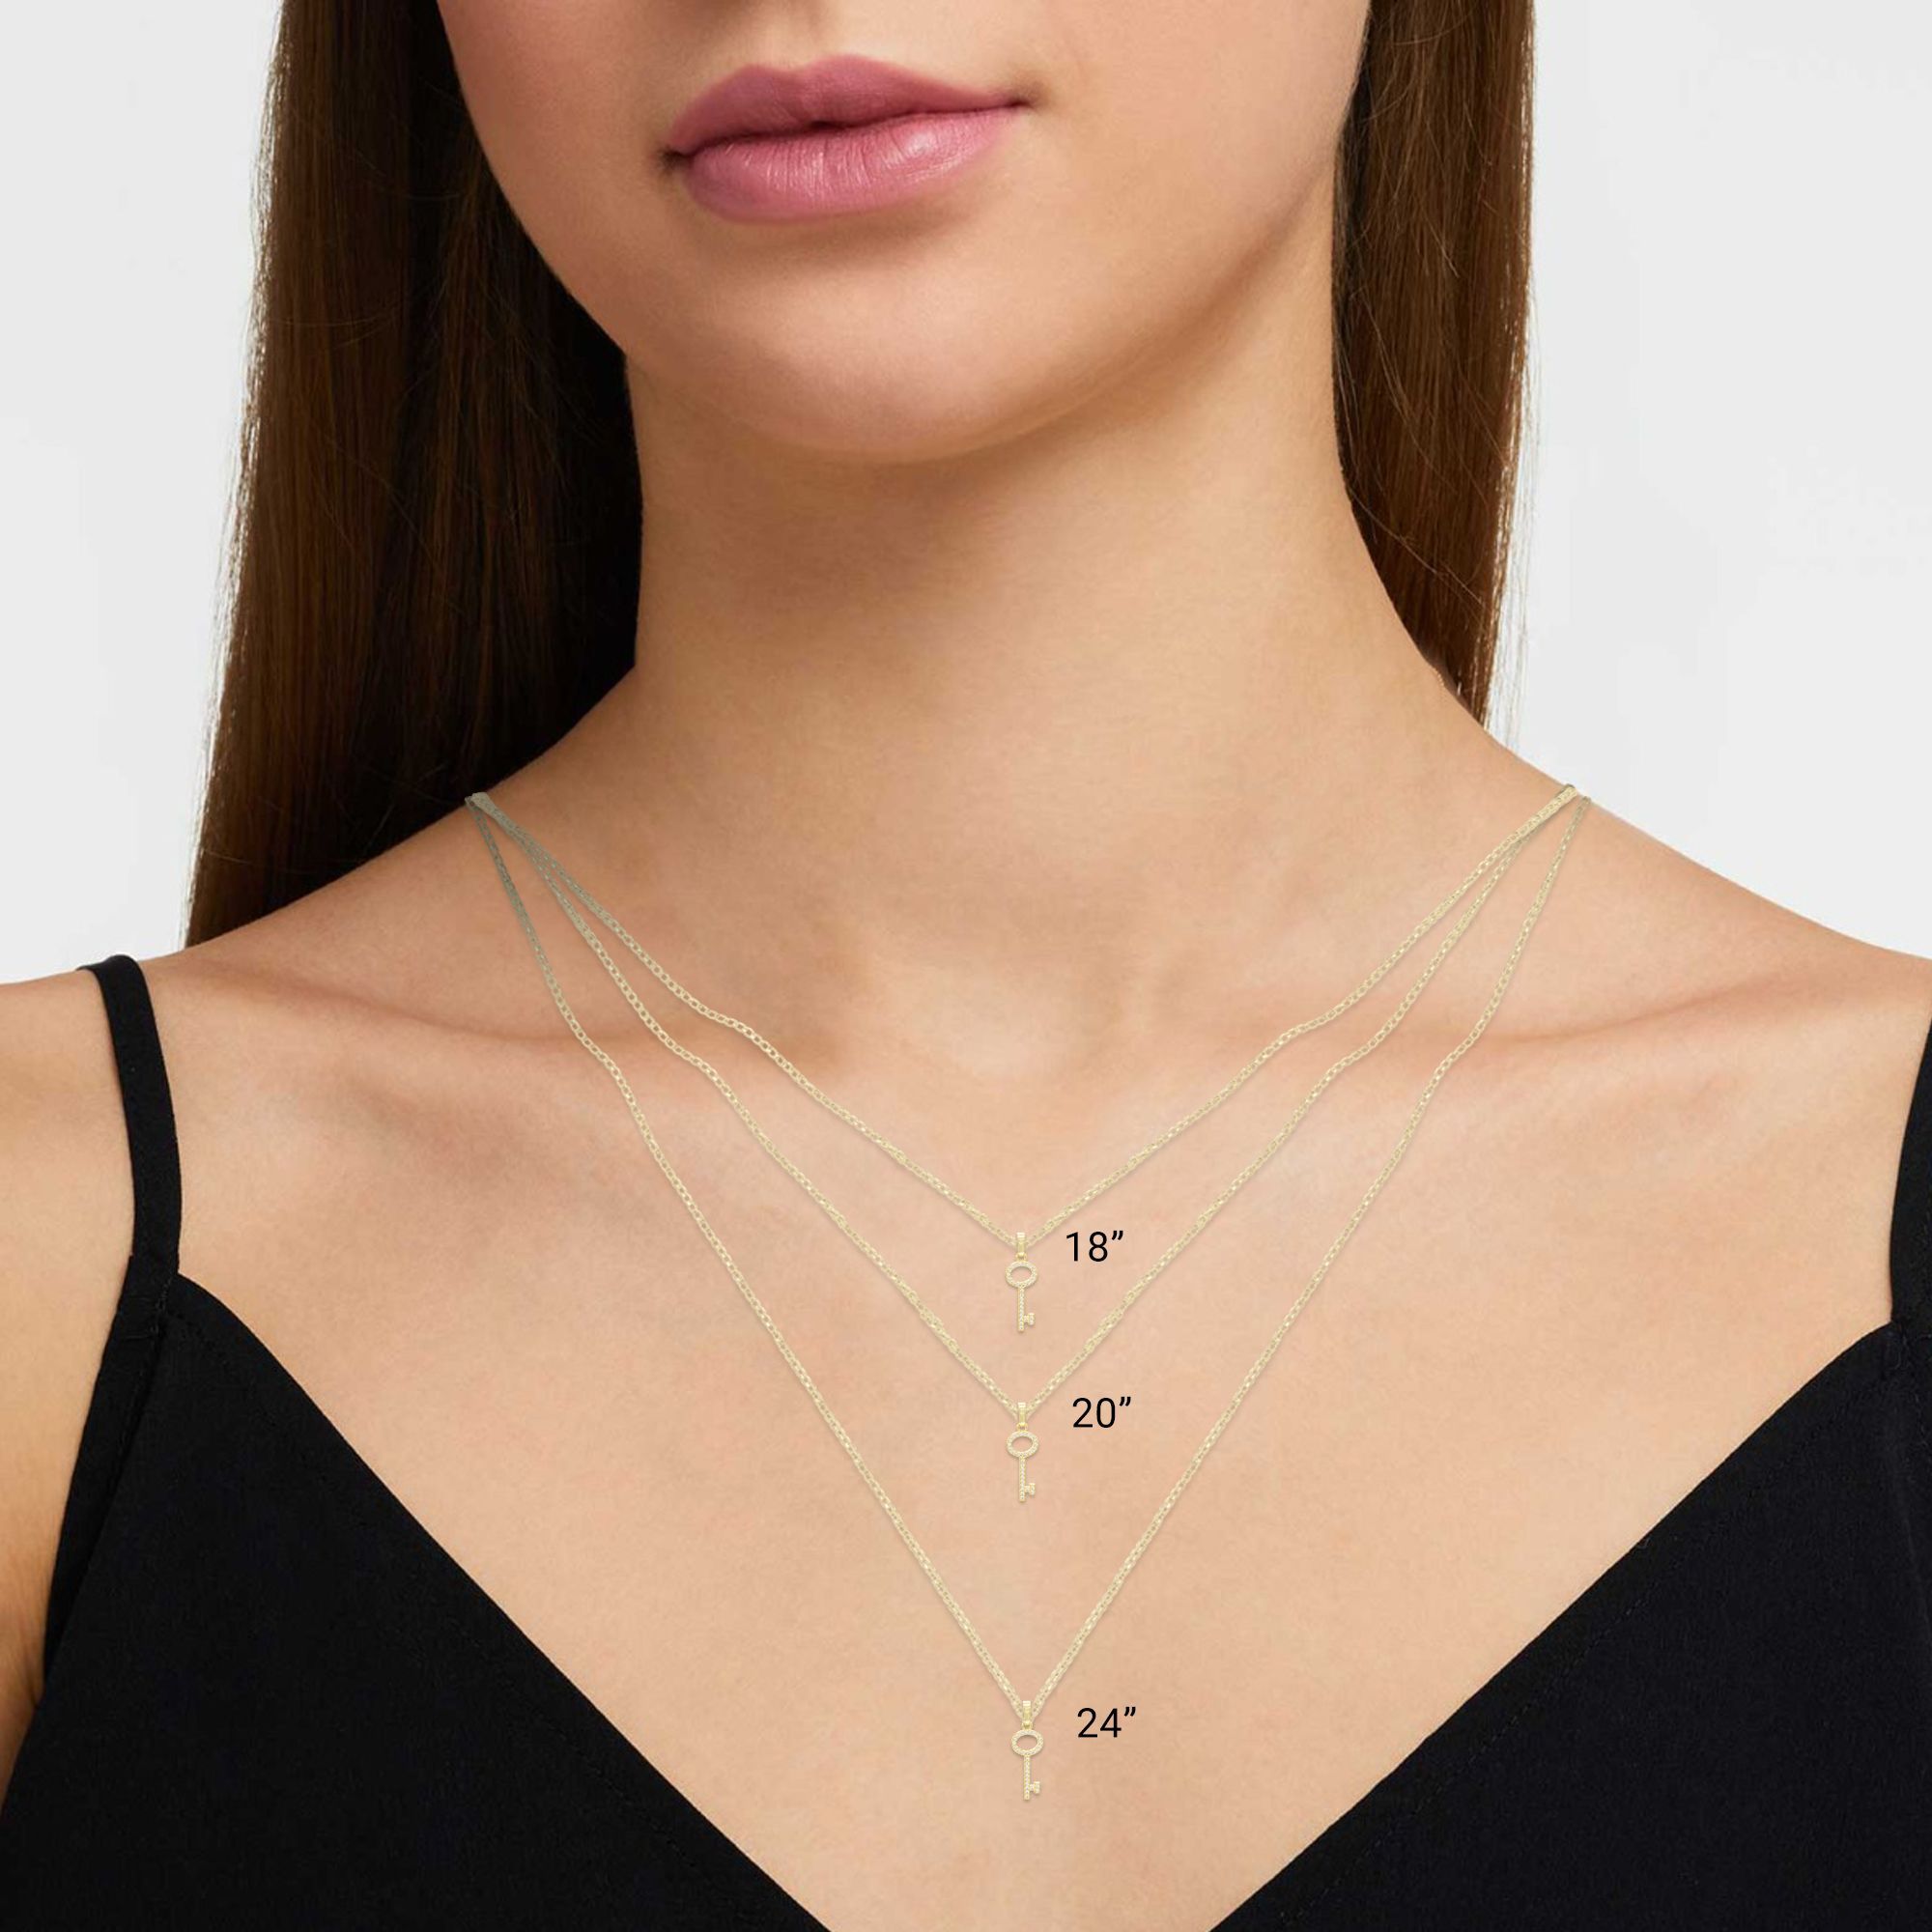 Key Cubic Zirconia Pendant With Necklace Set 14K Gold Filled